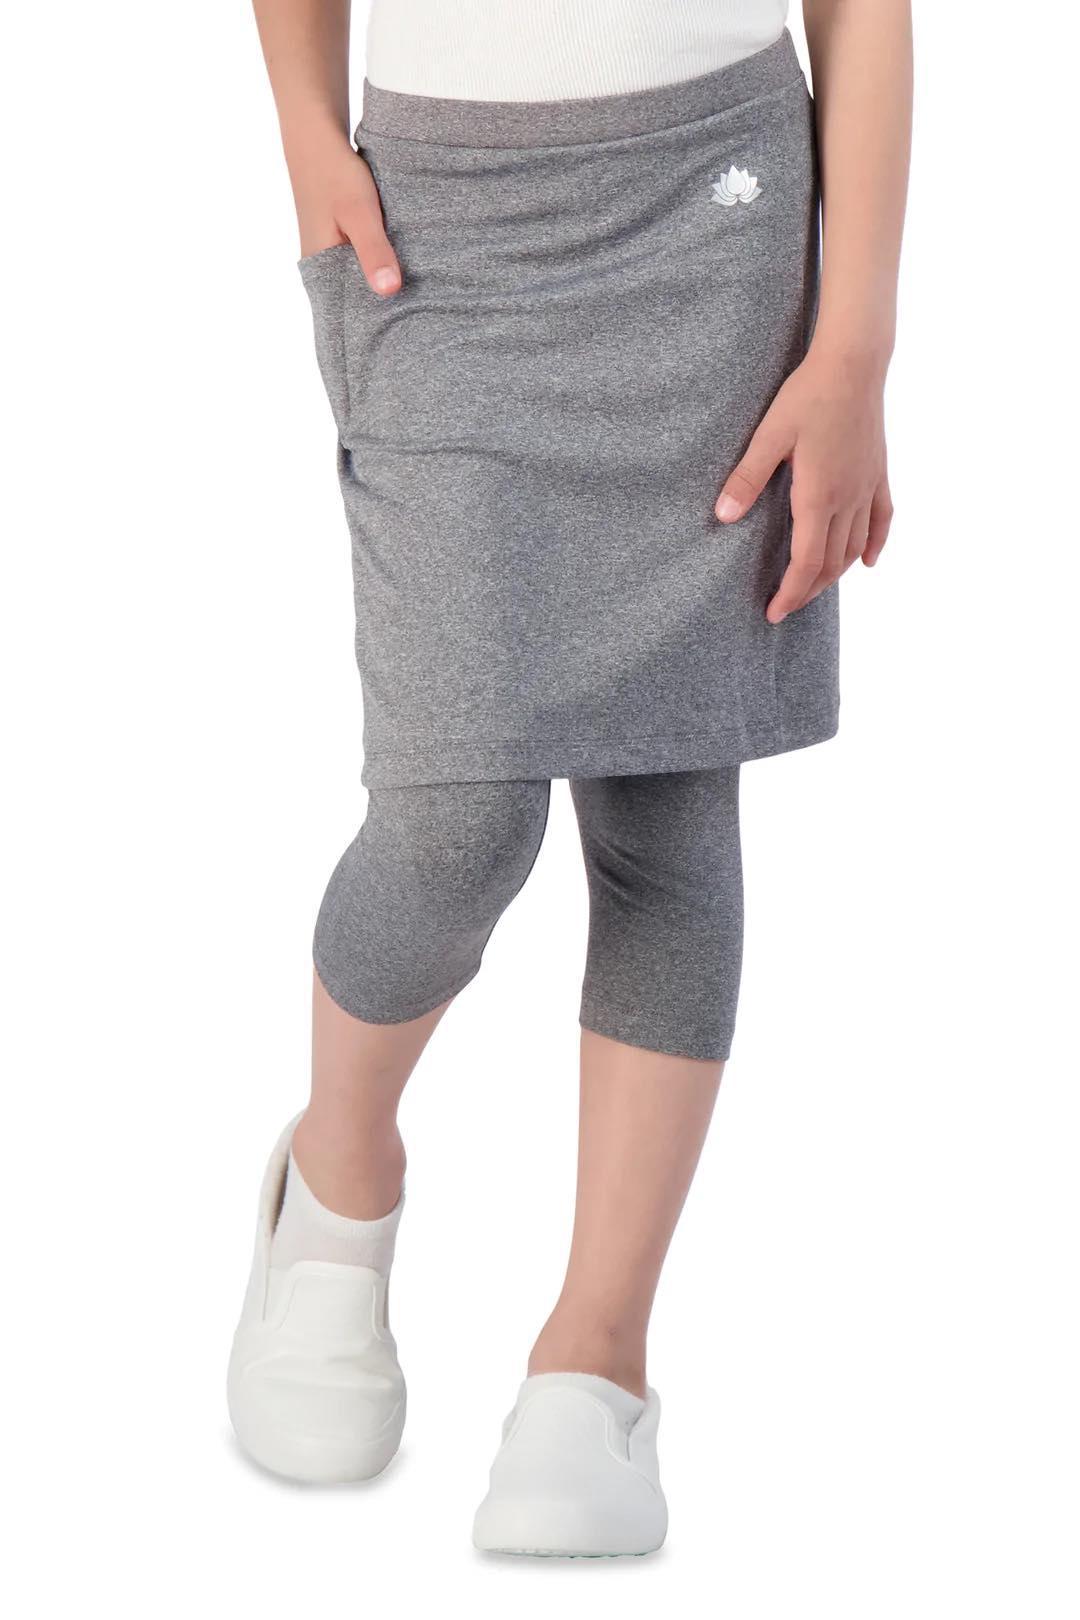 GIRLS Fit Snoga Athletic Skirt in Gray (Petite)